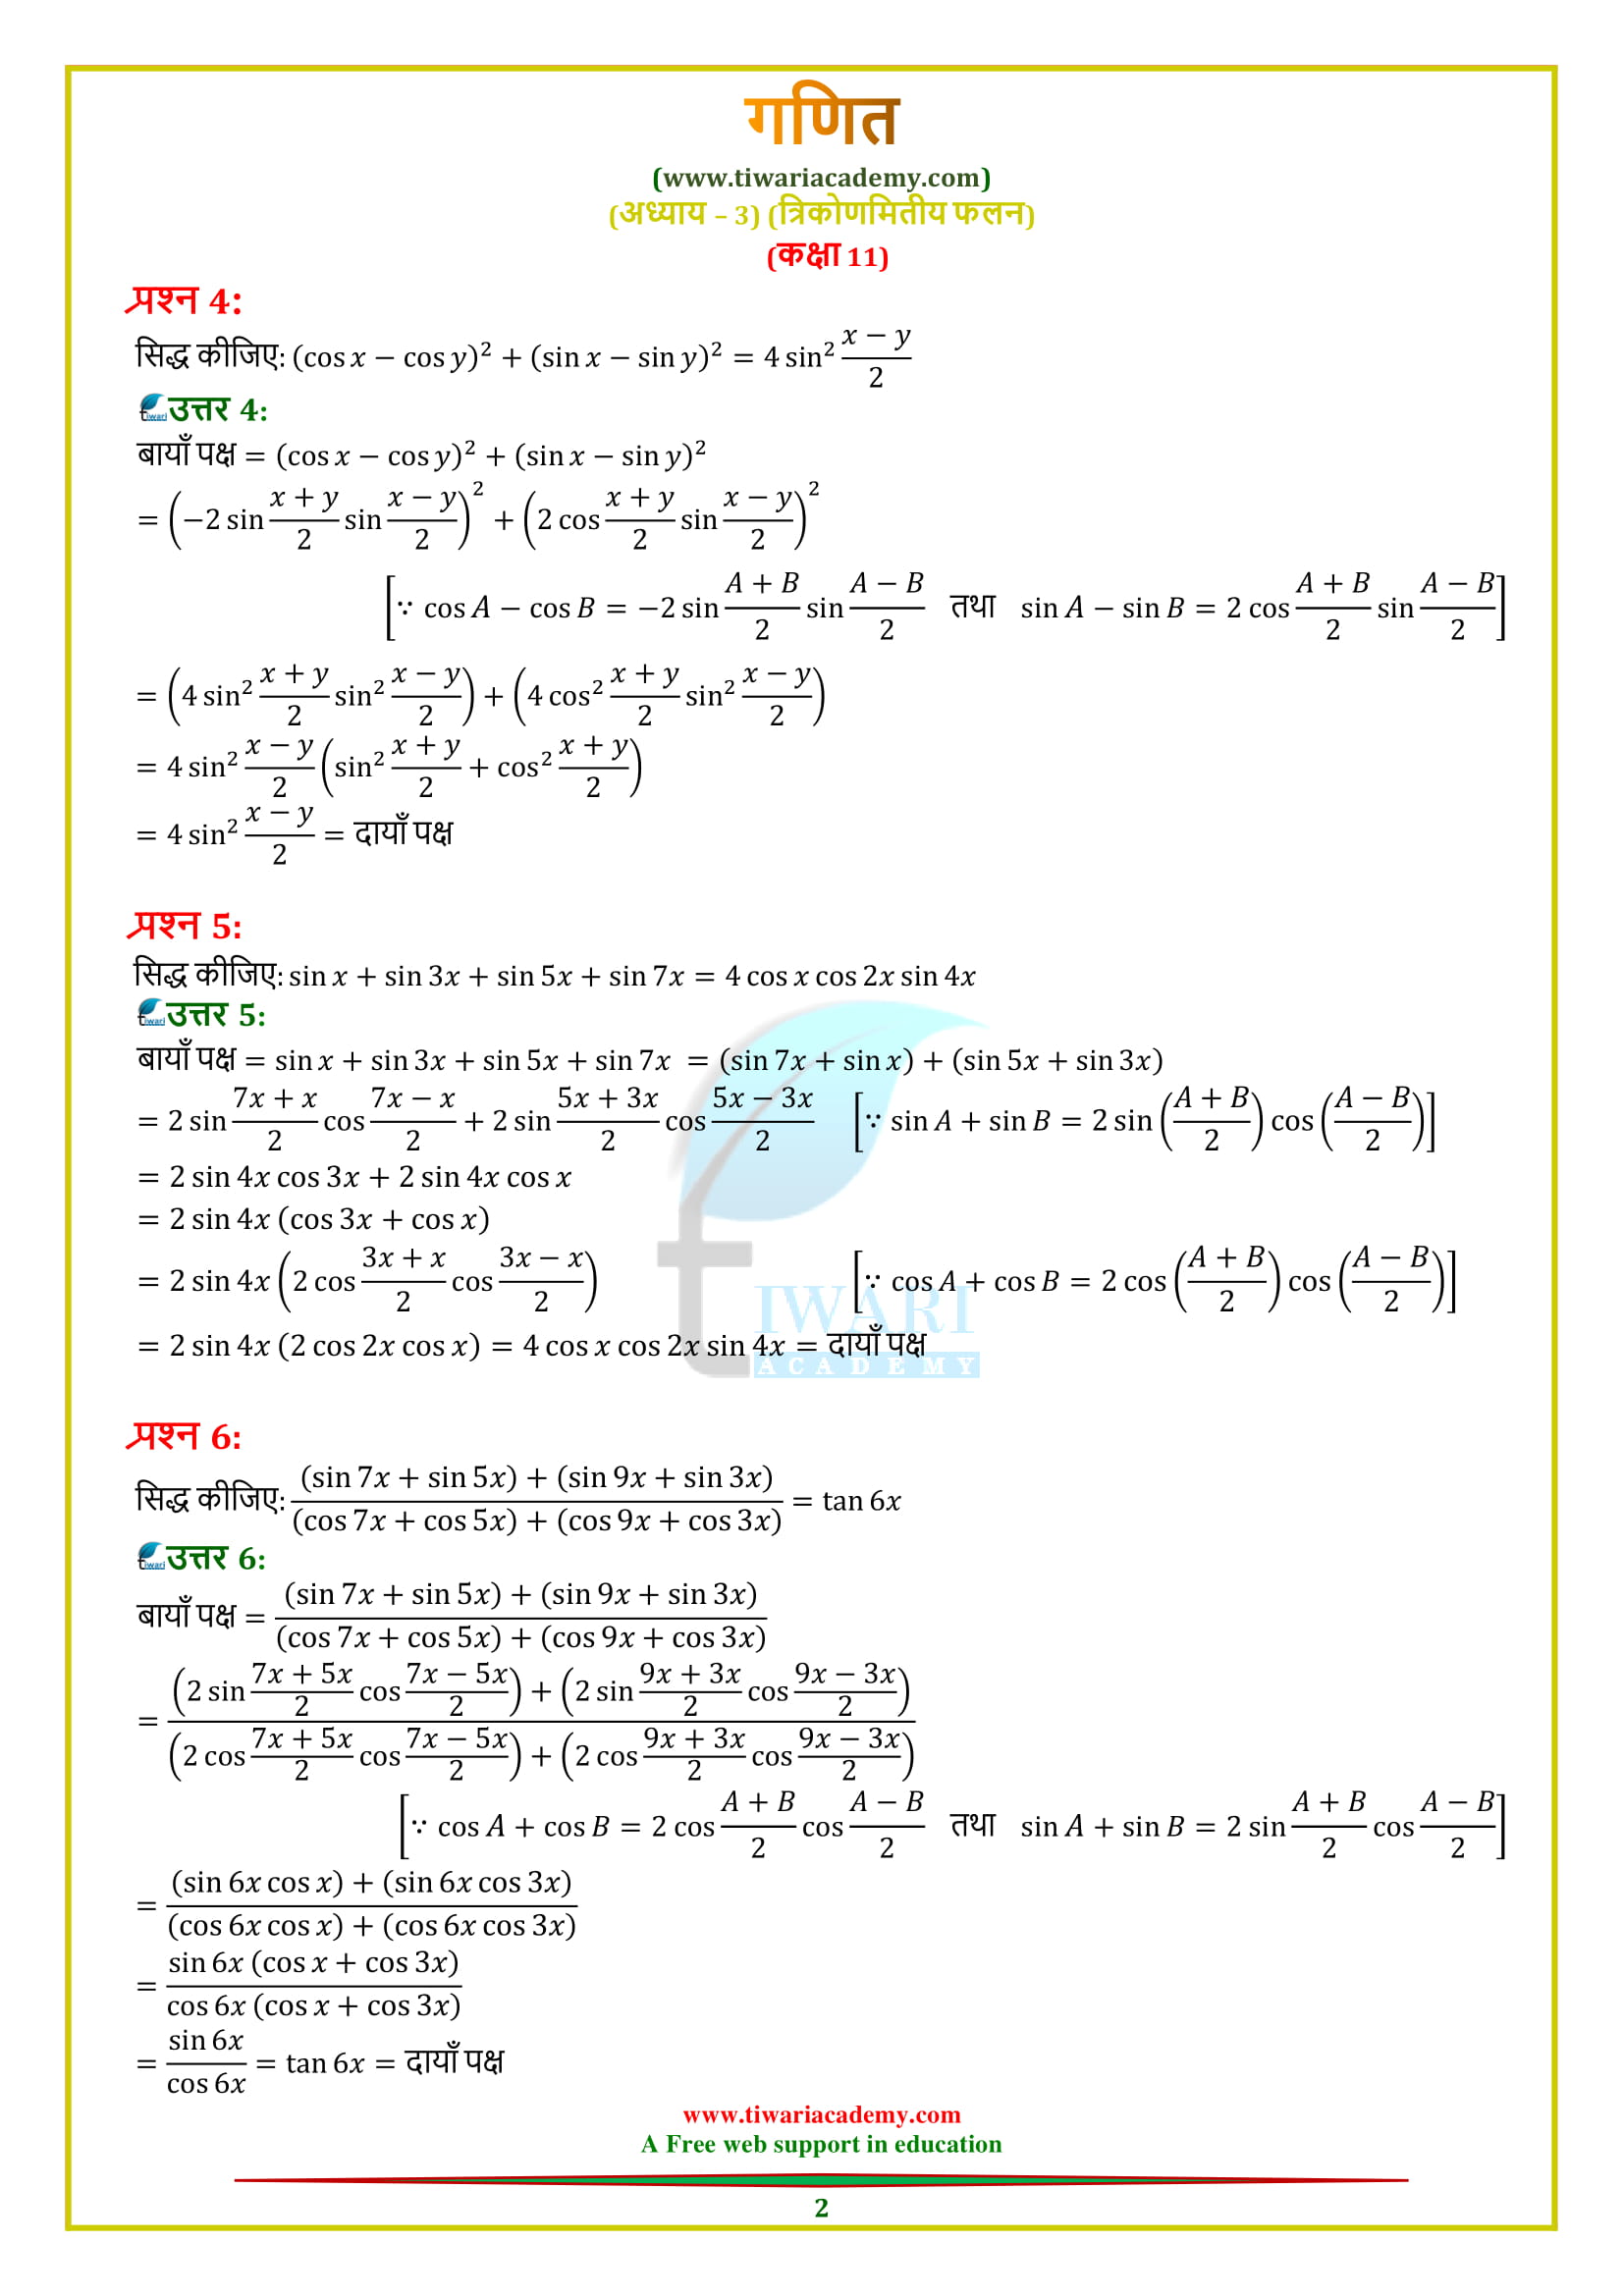 NCERT Solutions for Class 11 Maths Chapter 3 Miscellaneous Exercise questions 1, 2, 3, 4, 5, 6, 7.